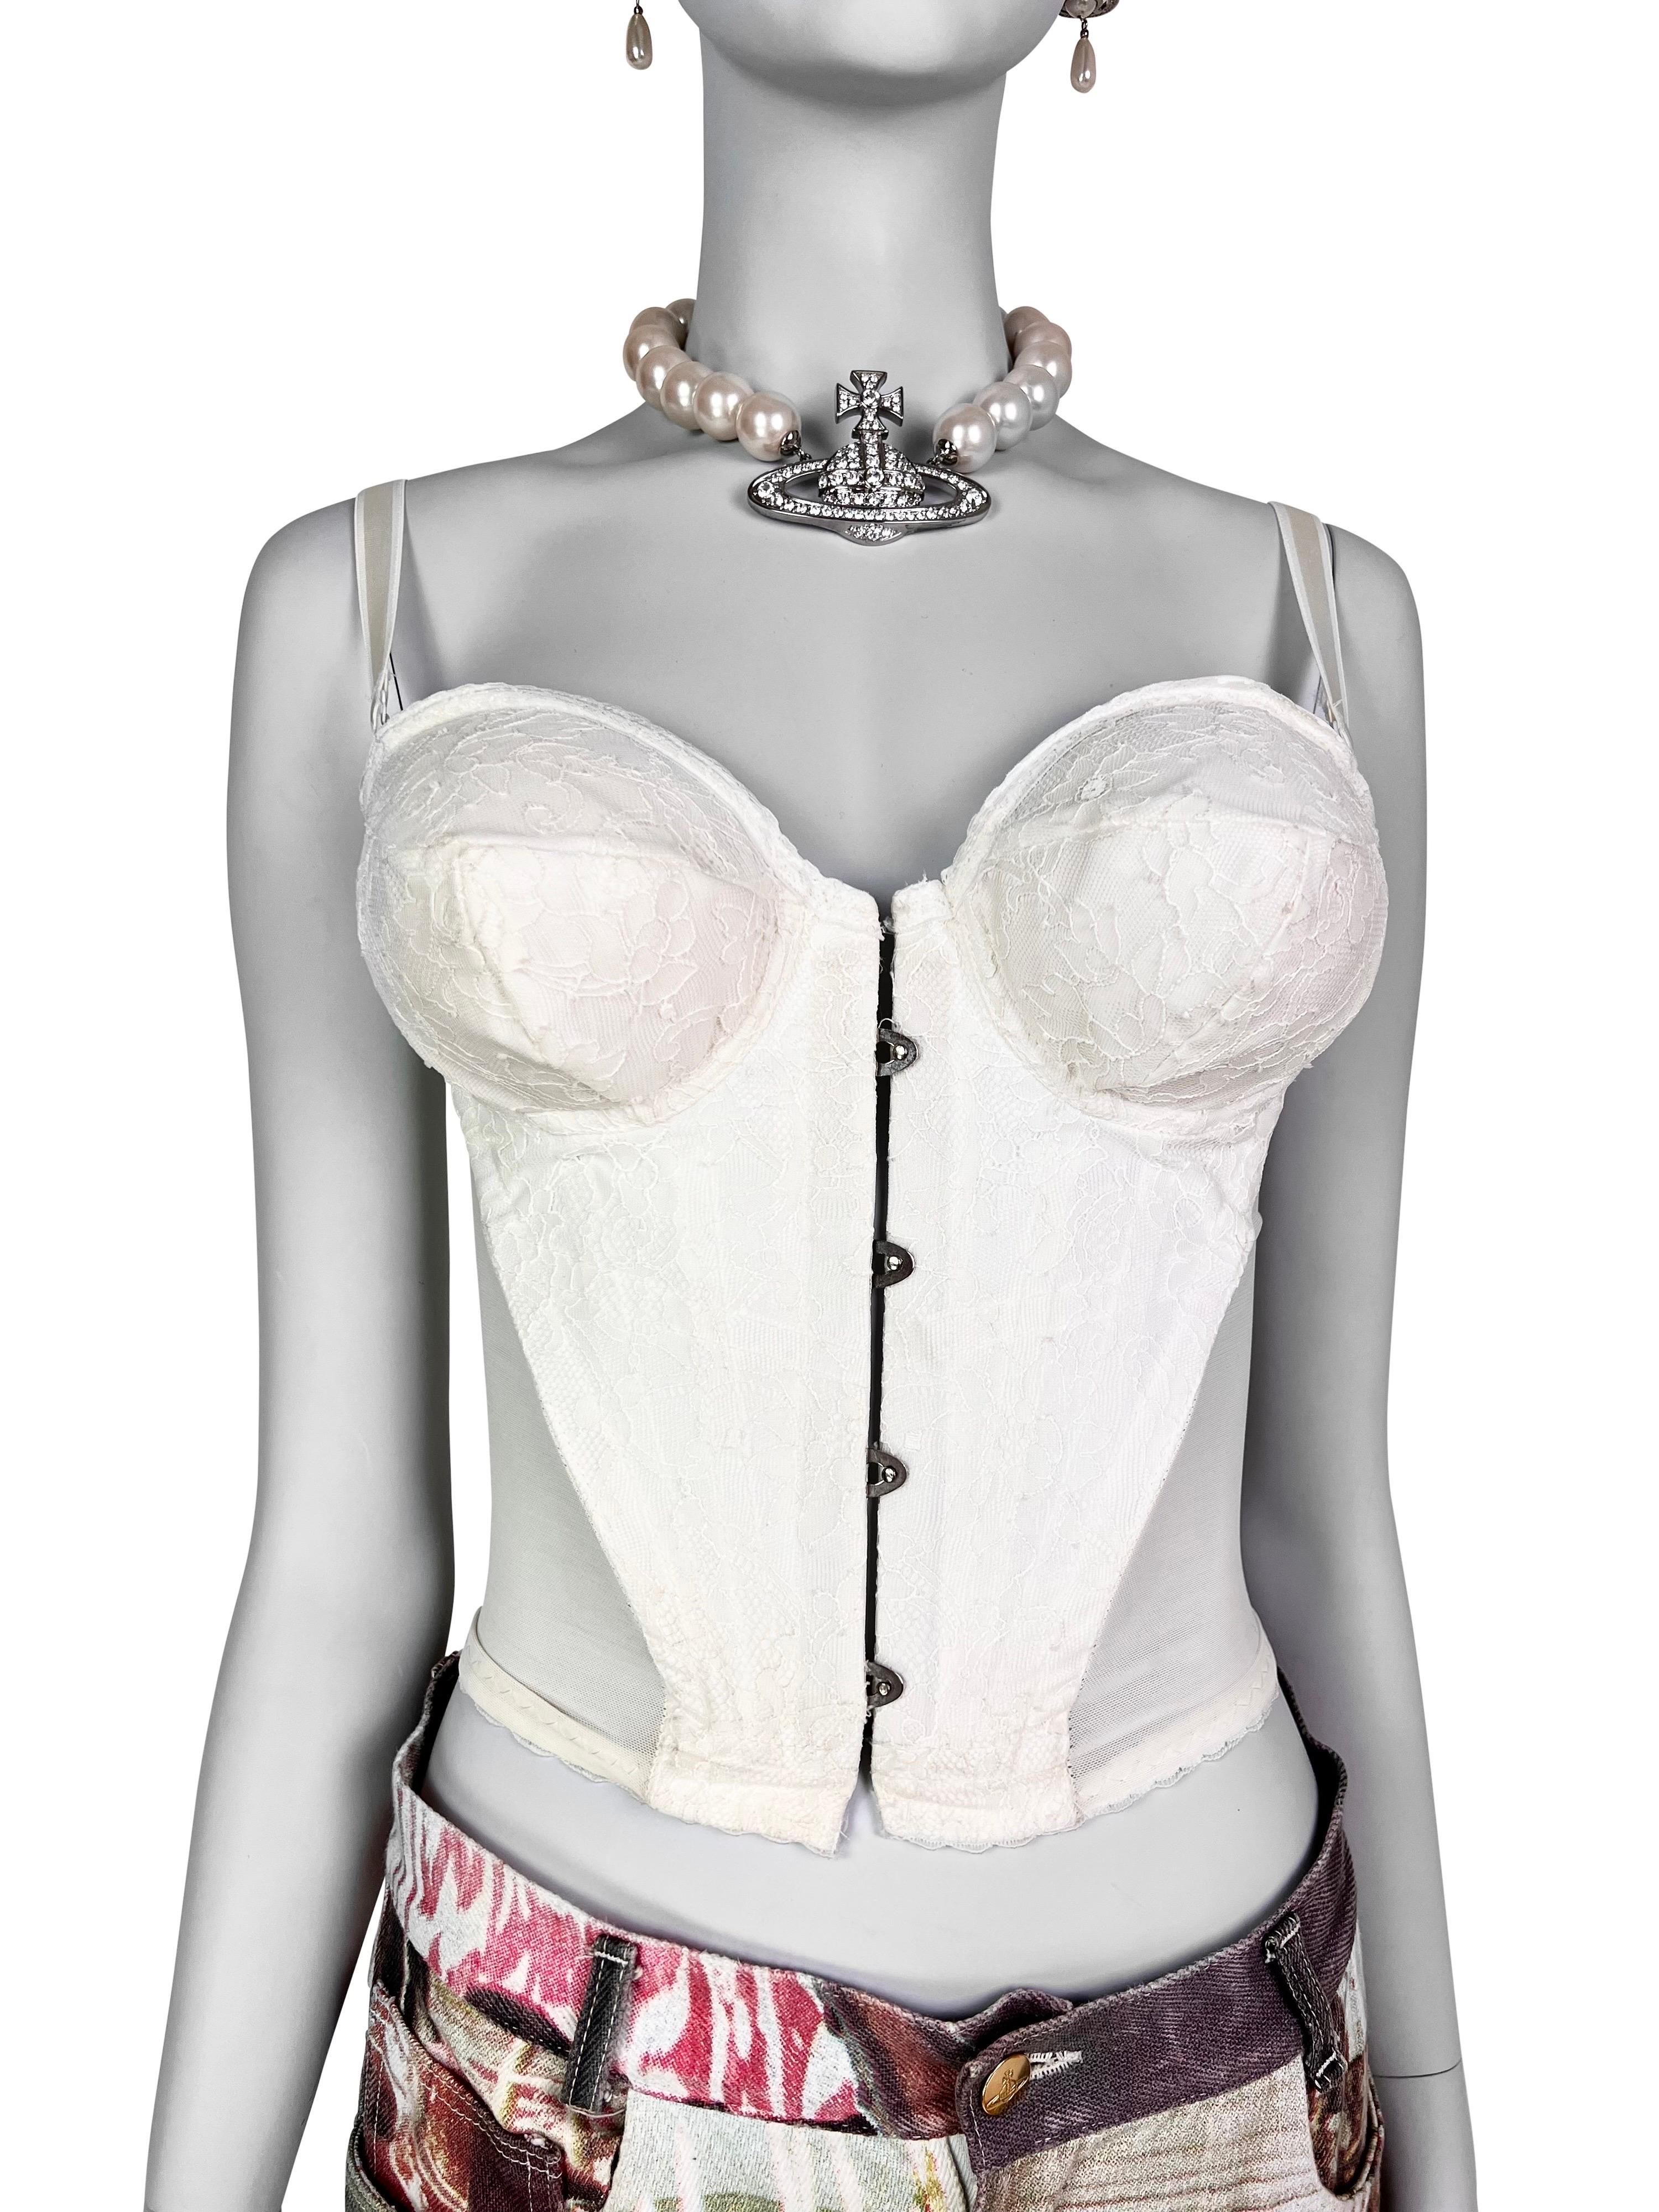 A key item of the iconic “Vive La Cocotte” collection by Vivienne Westwood, the epitome of extravagance, this stunning bustier/corset has a couple of pointy, bullet-bra-style padded cups, padding of which is easily removable (but why would you do